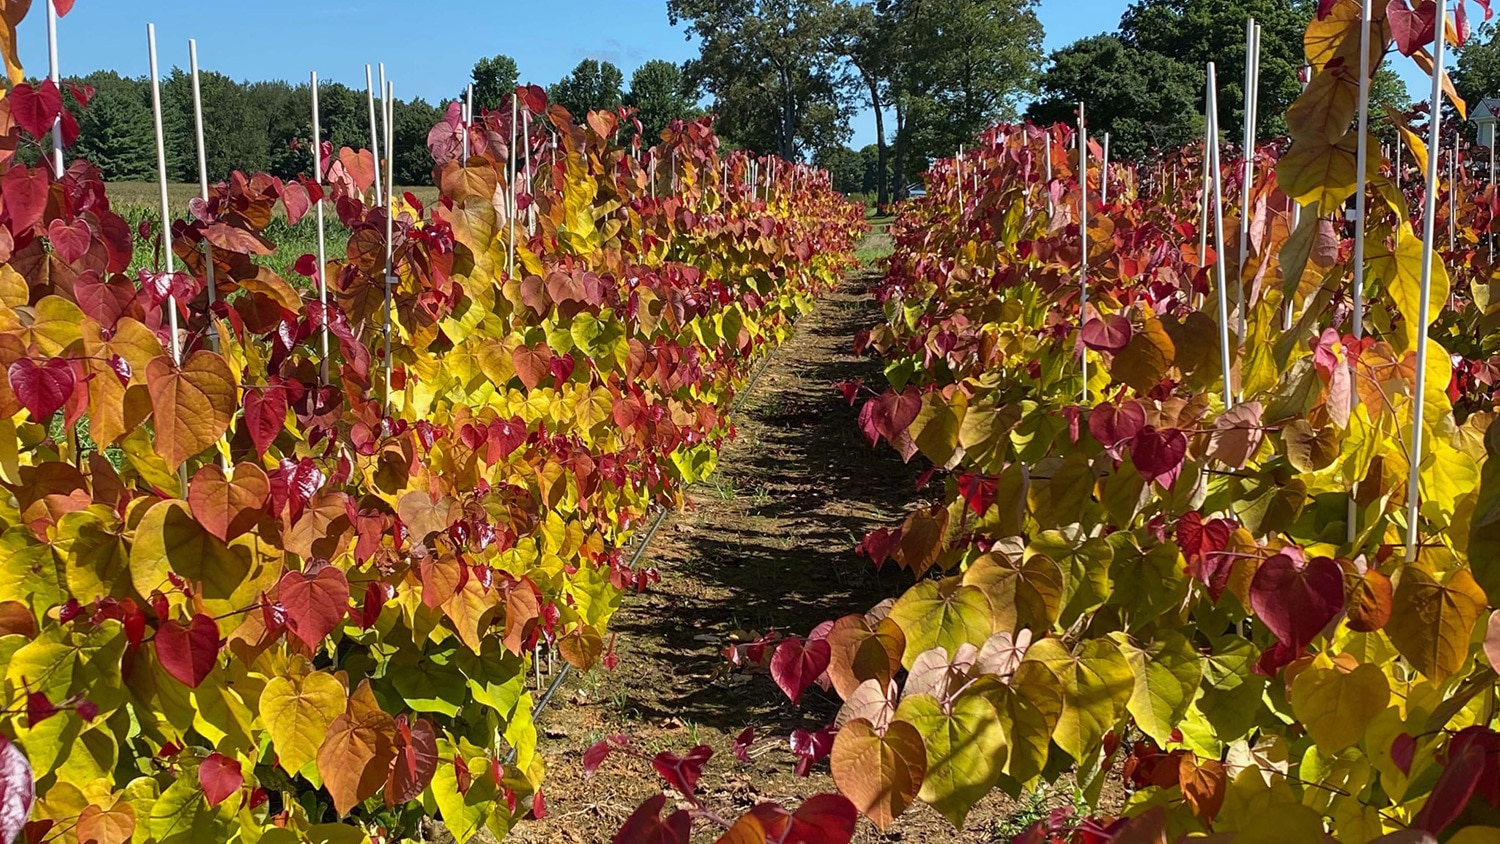 Rows of Flame Thrower redbud trees grow in a Tennessee field